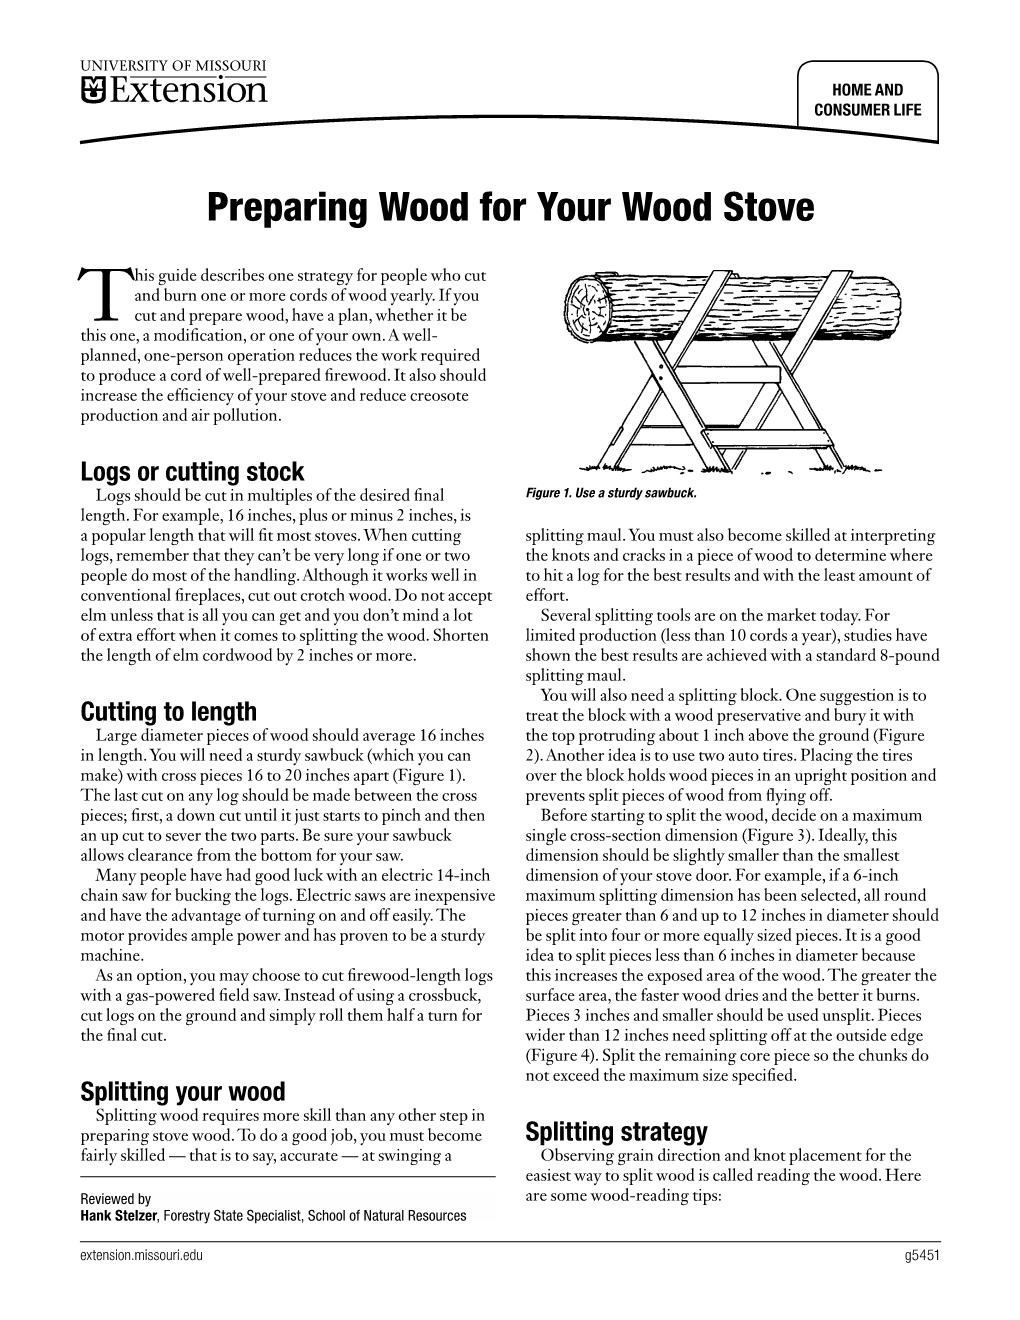 Preparing Wood for Your Wood Stove